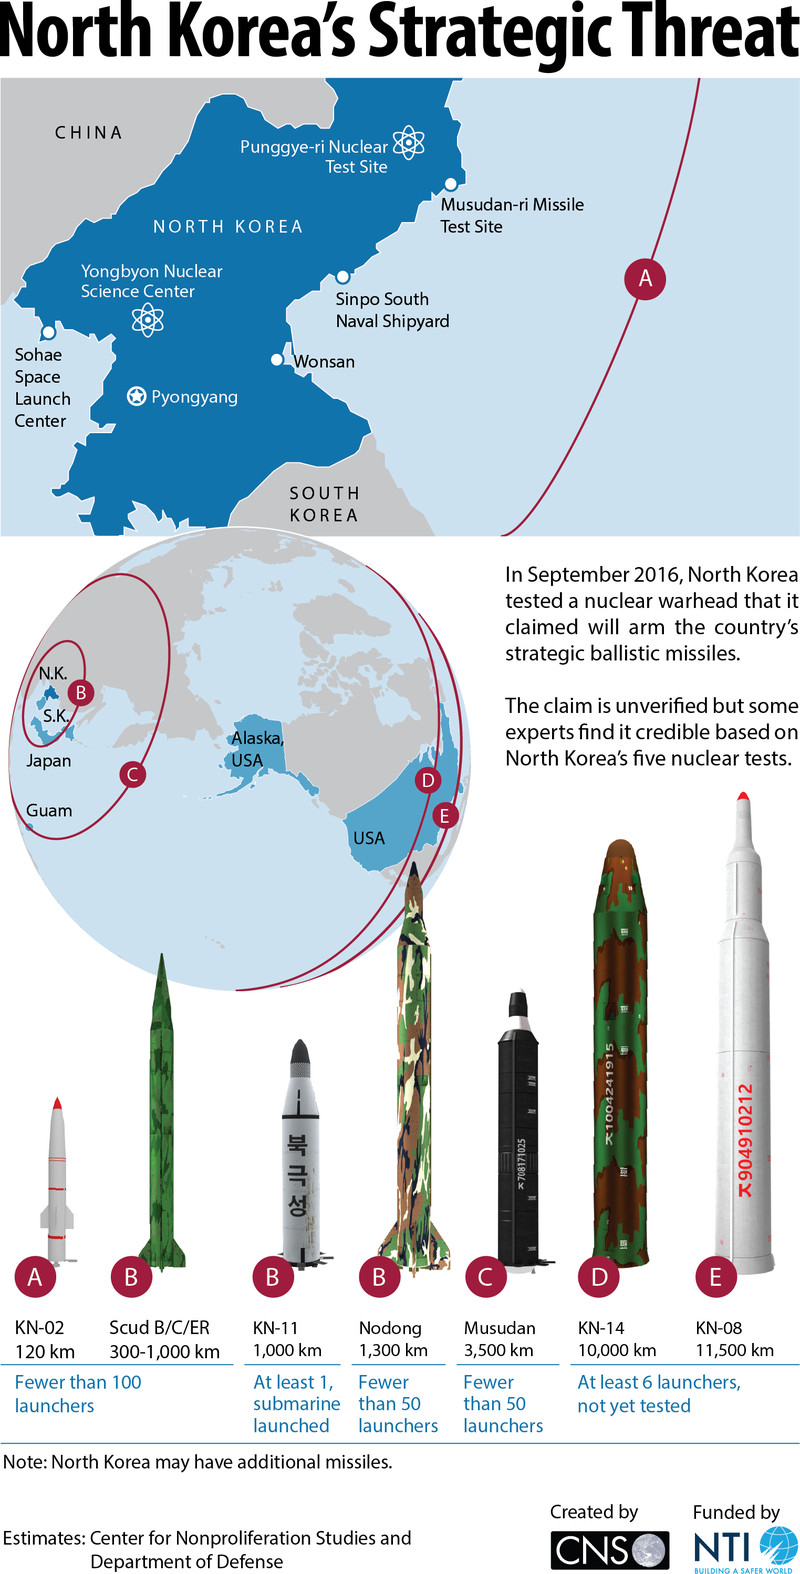 dprk_infographic_nti_version_170213.width_800.png